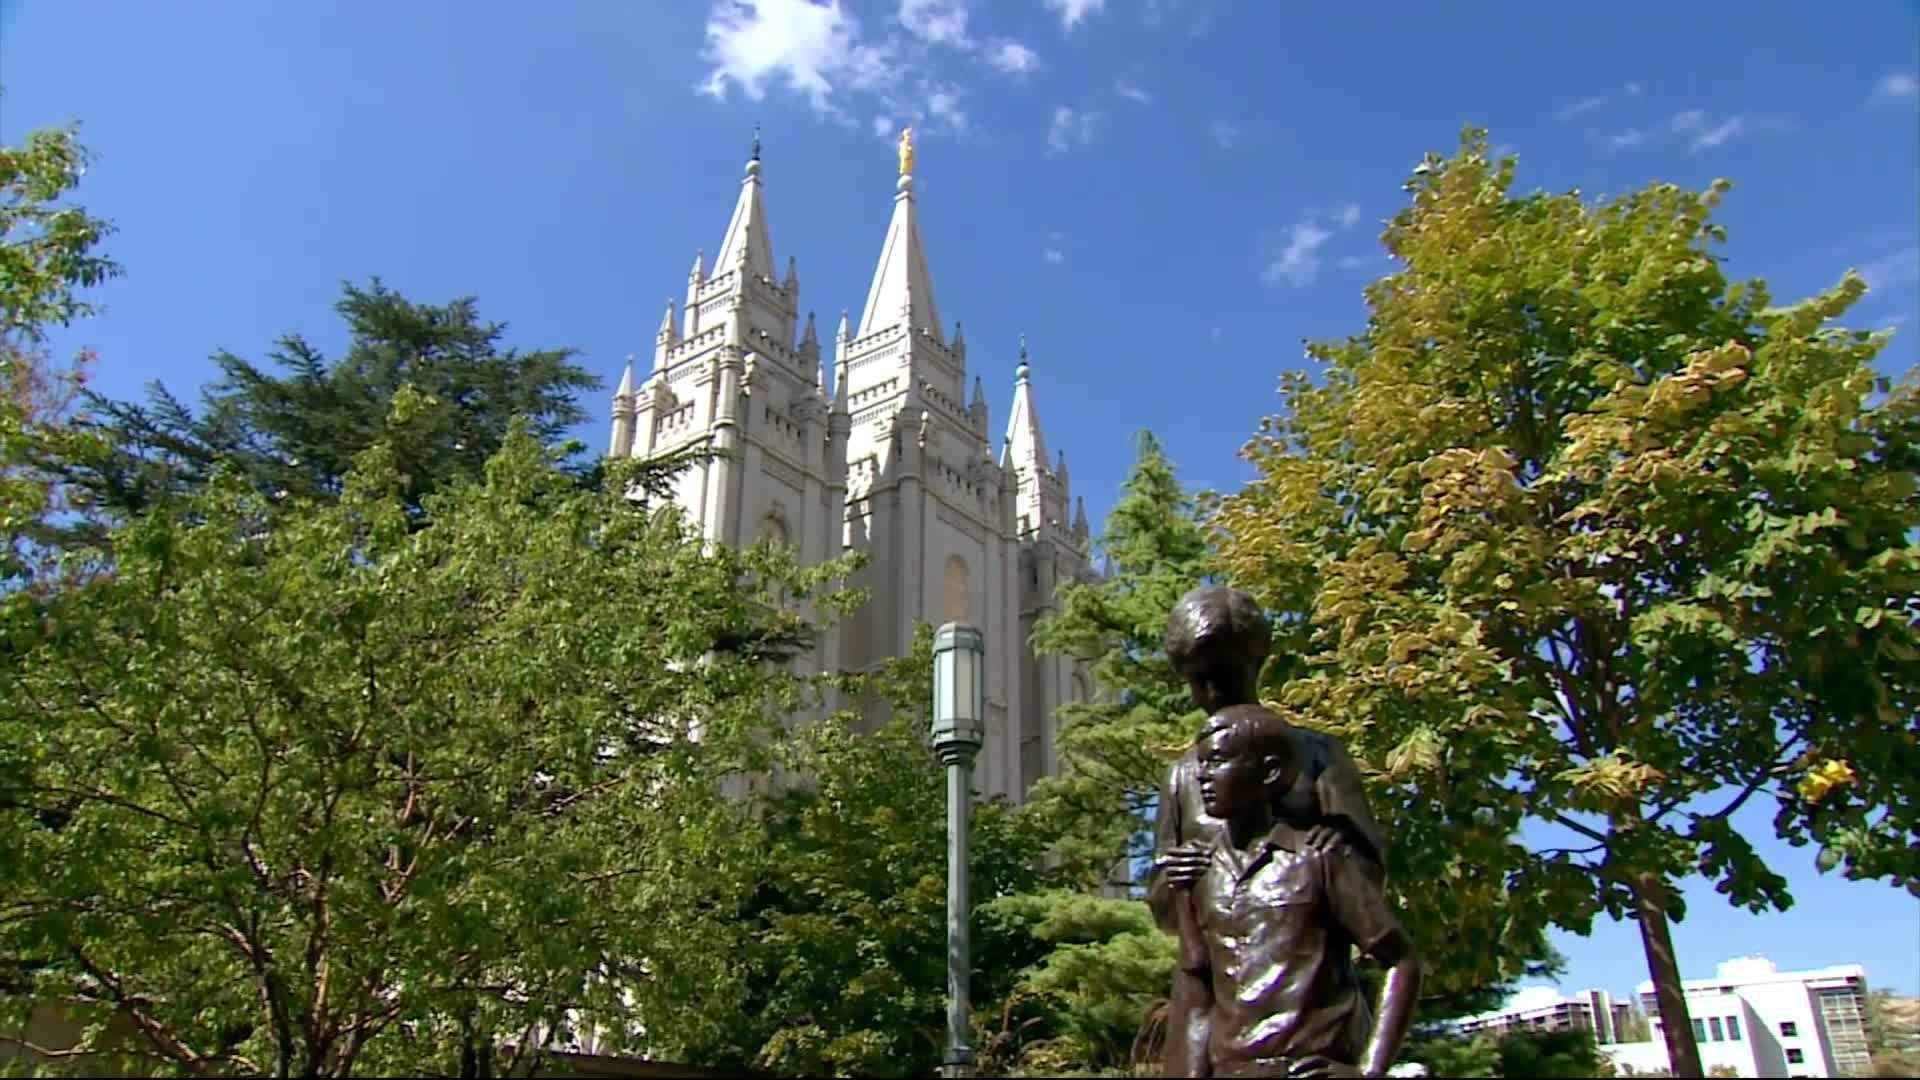 A picture of the Salt Lake Temple with trees and a statue framing it.